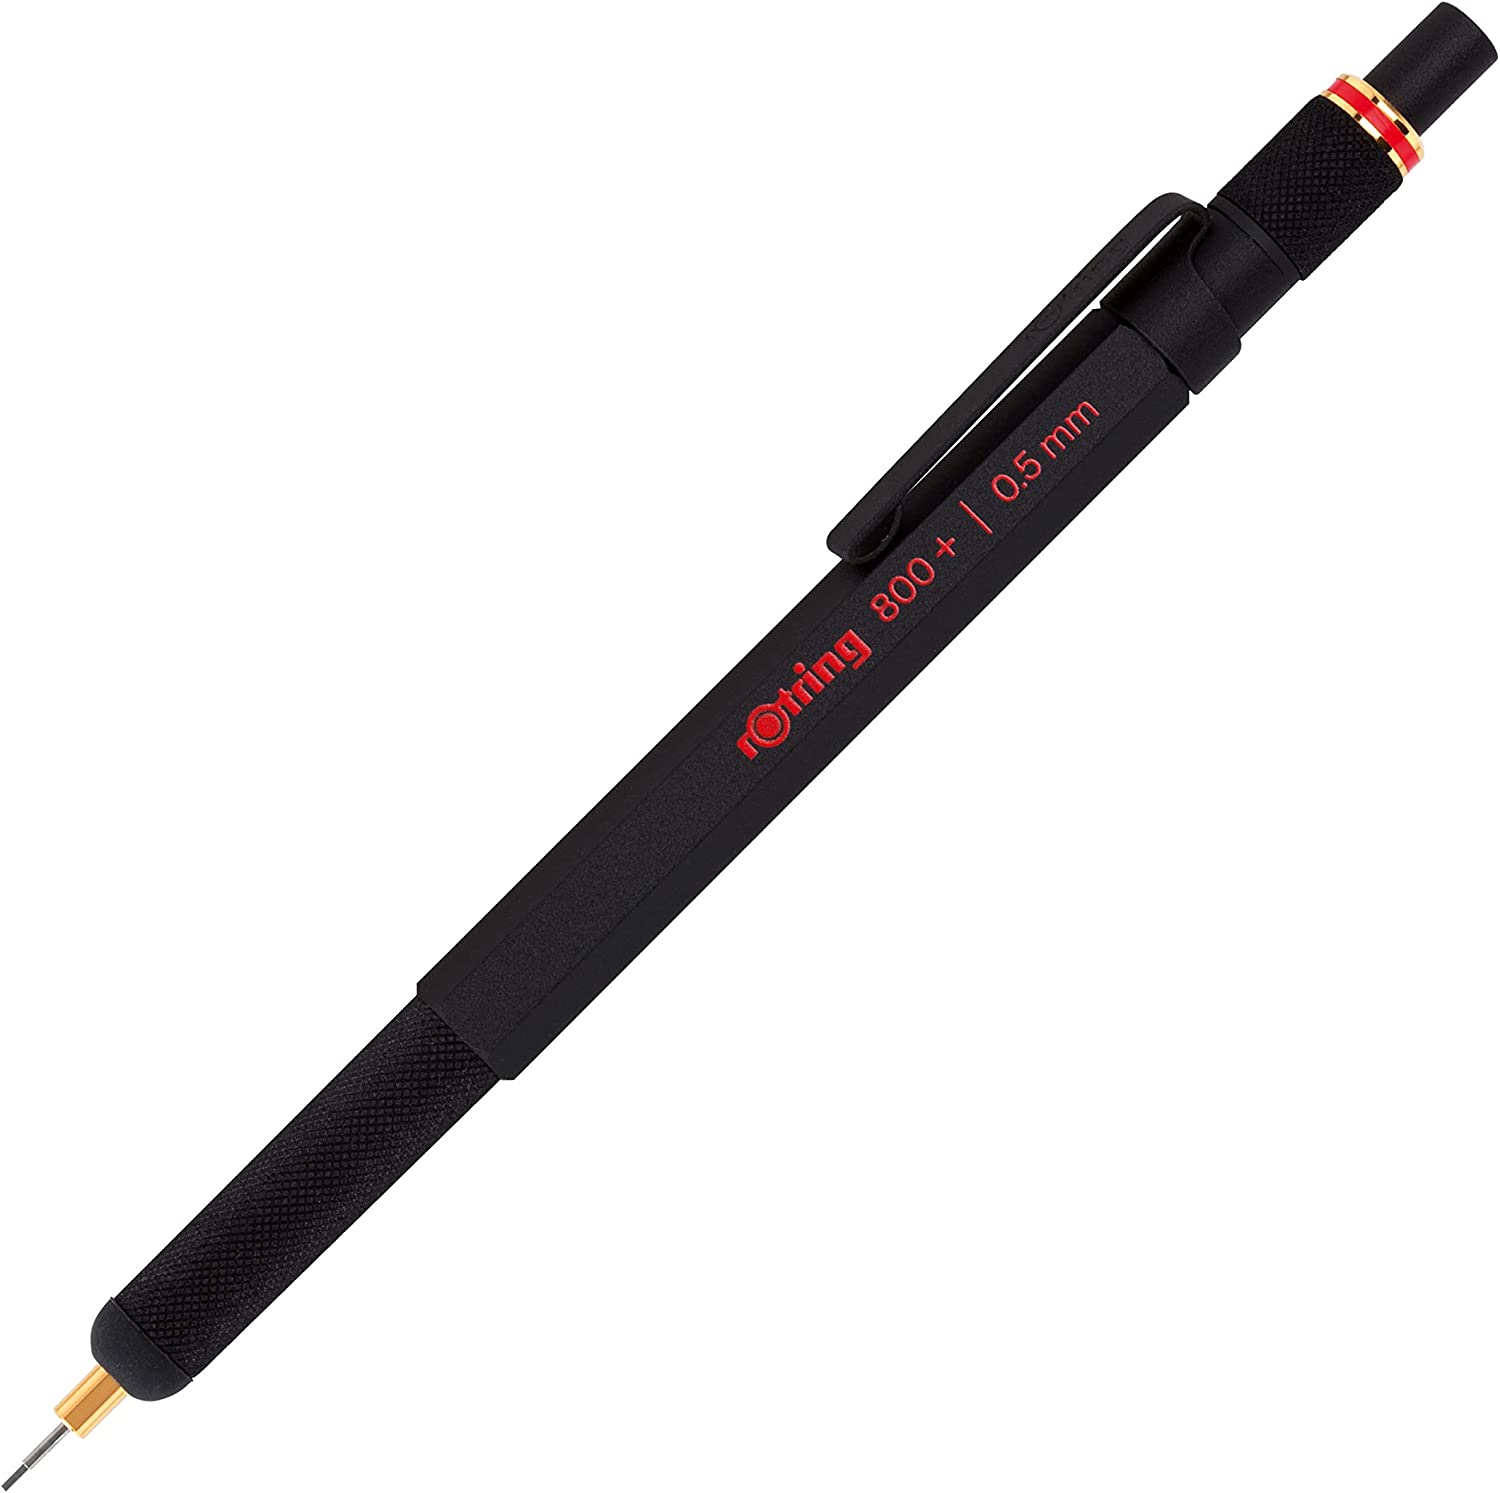 Mechanical Pencil and Touchscreen Stylus